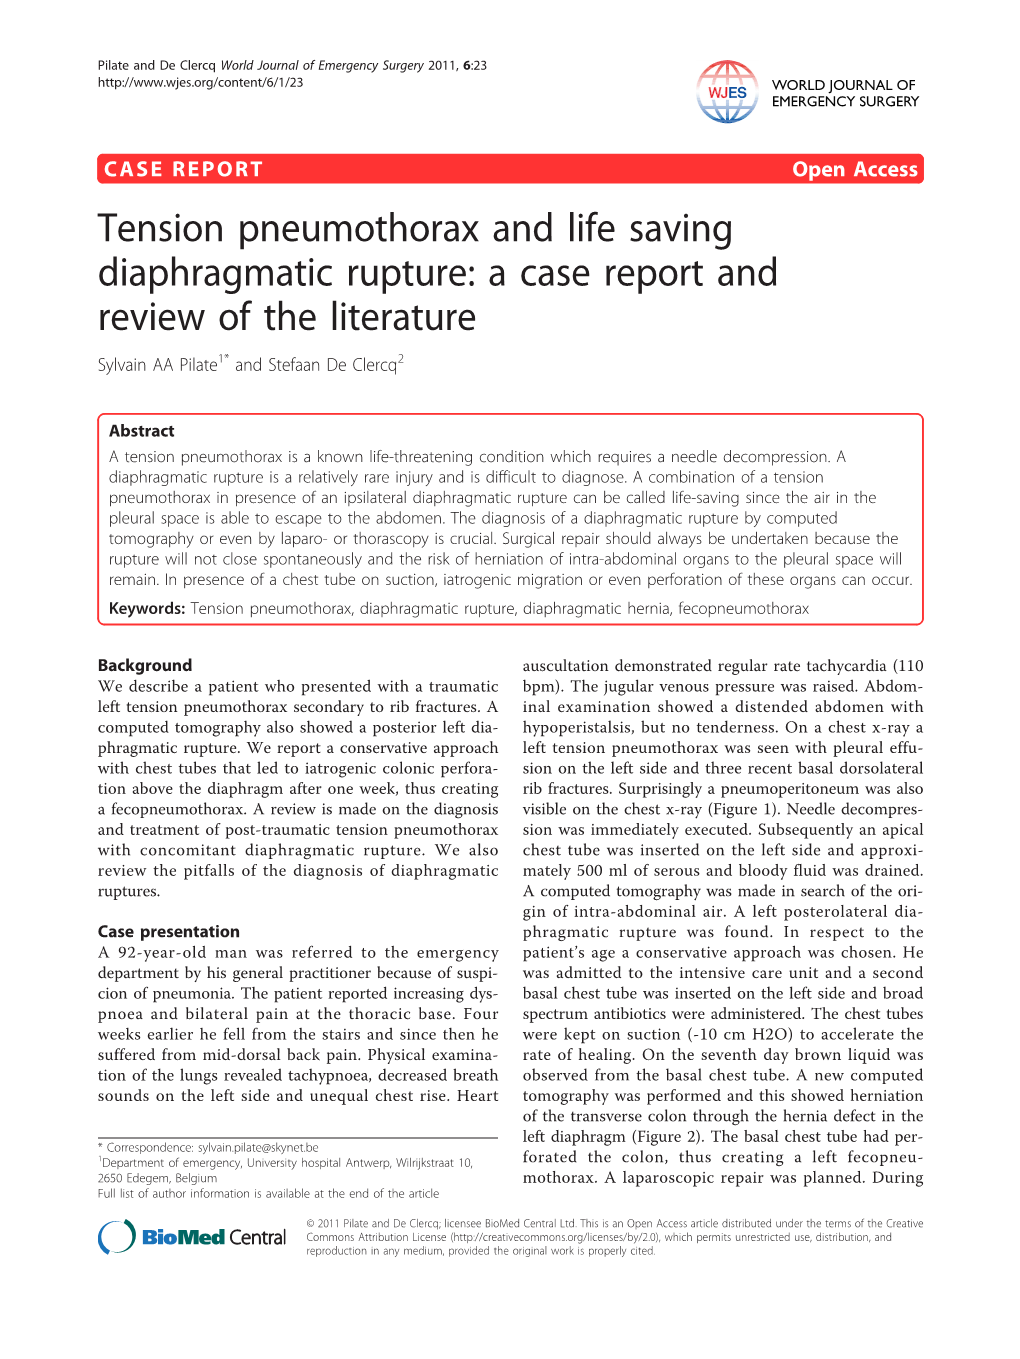 Tension Pneumothorax and Life Saving Diaphragmatic Rupture: a Case Report and Review of the Literature Sylvain AA Pilate1* and Stefaan De Clercq2